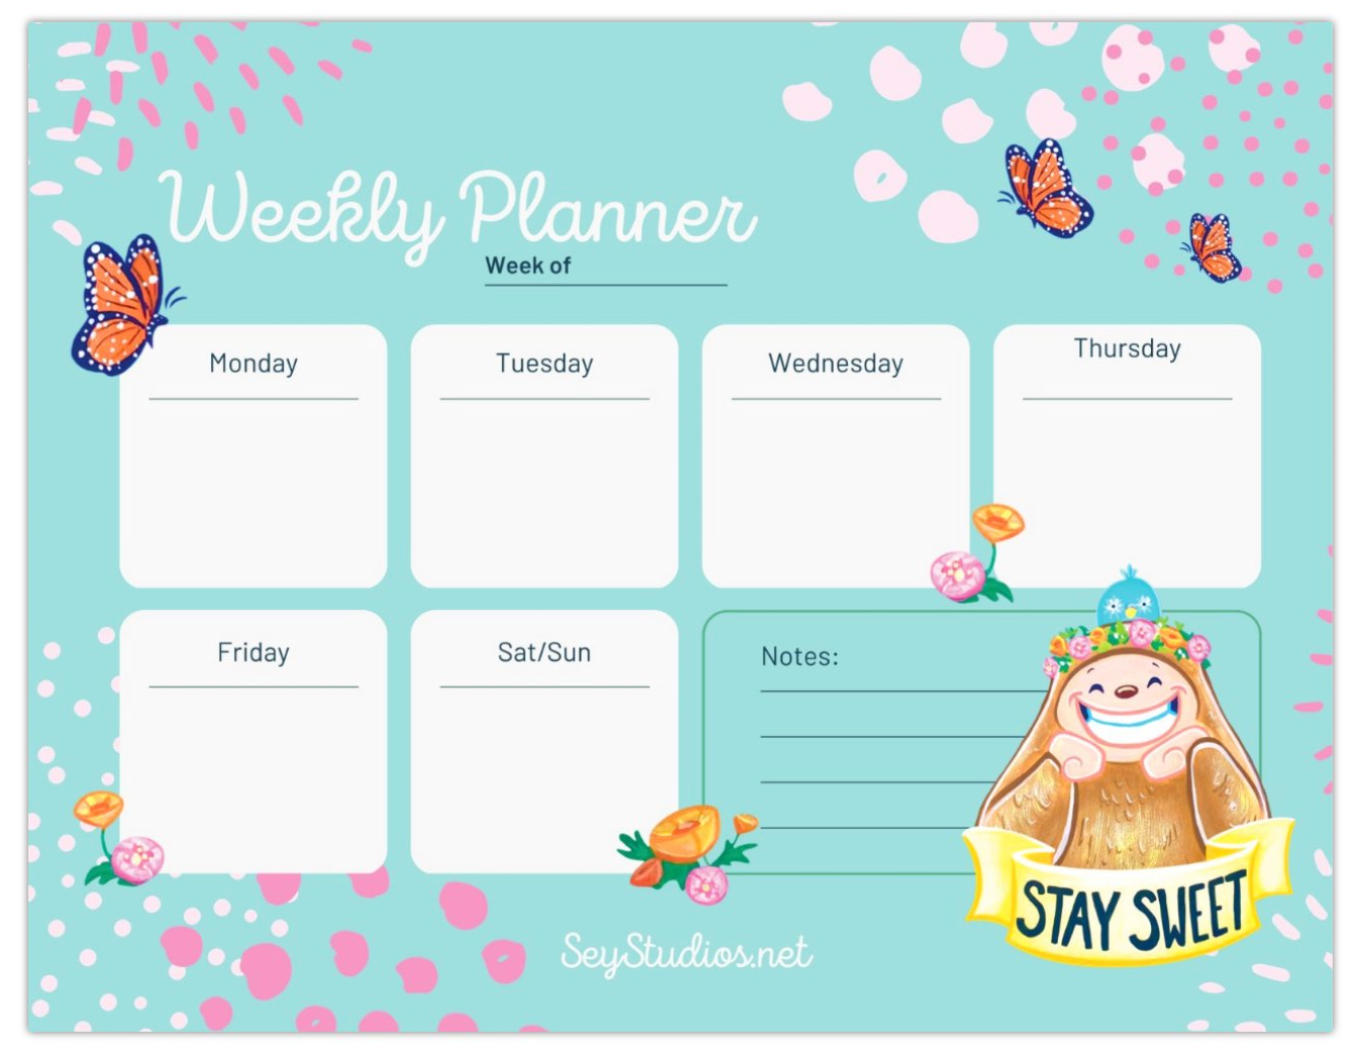 "Stay Sweet Sasquatch" Weekly Planner Pad